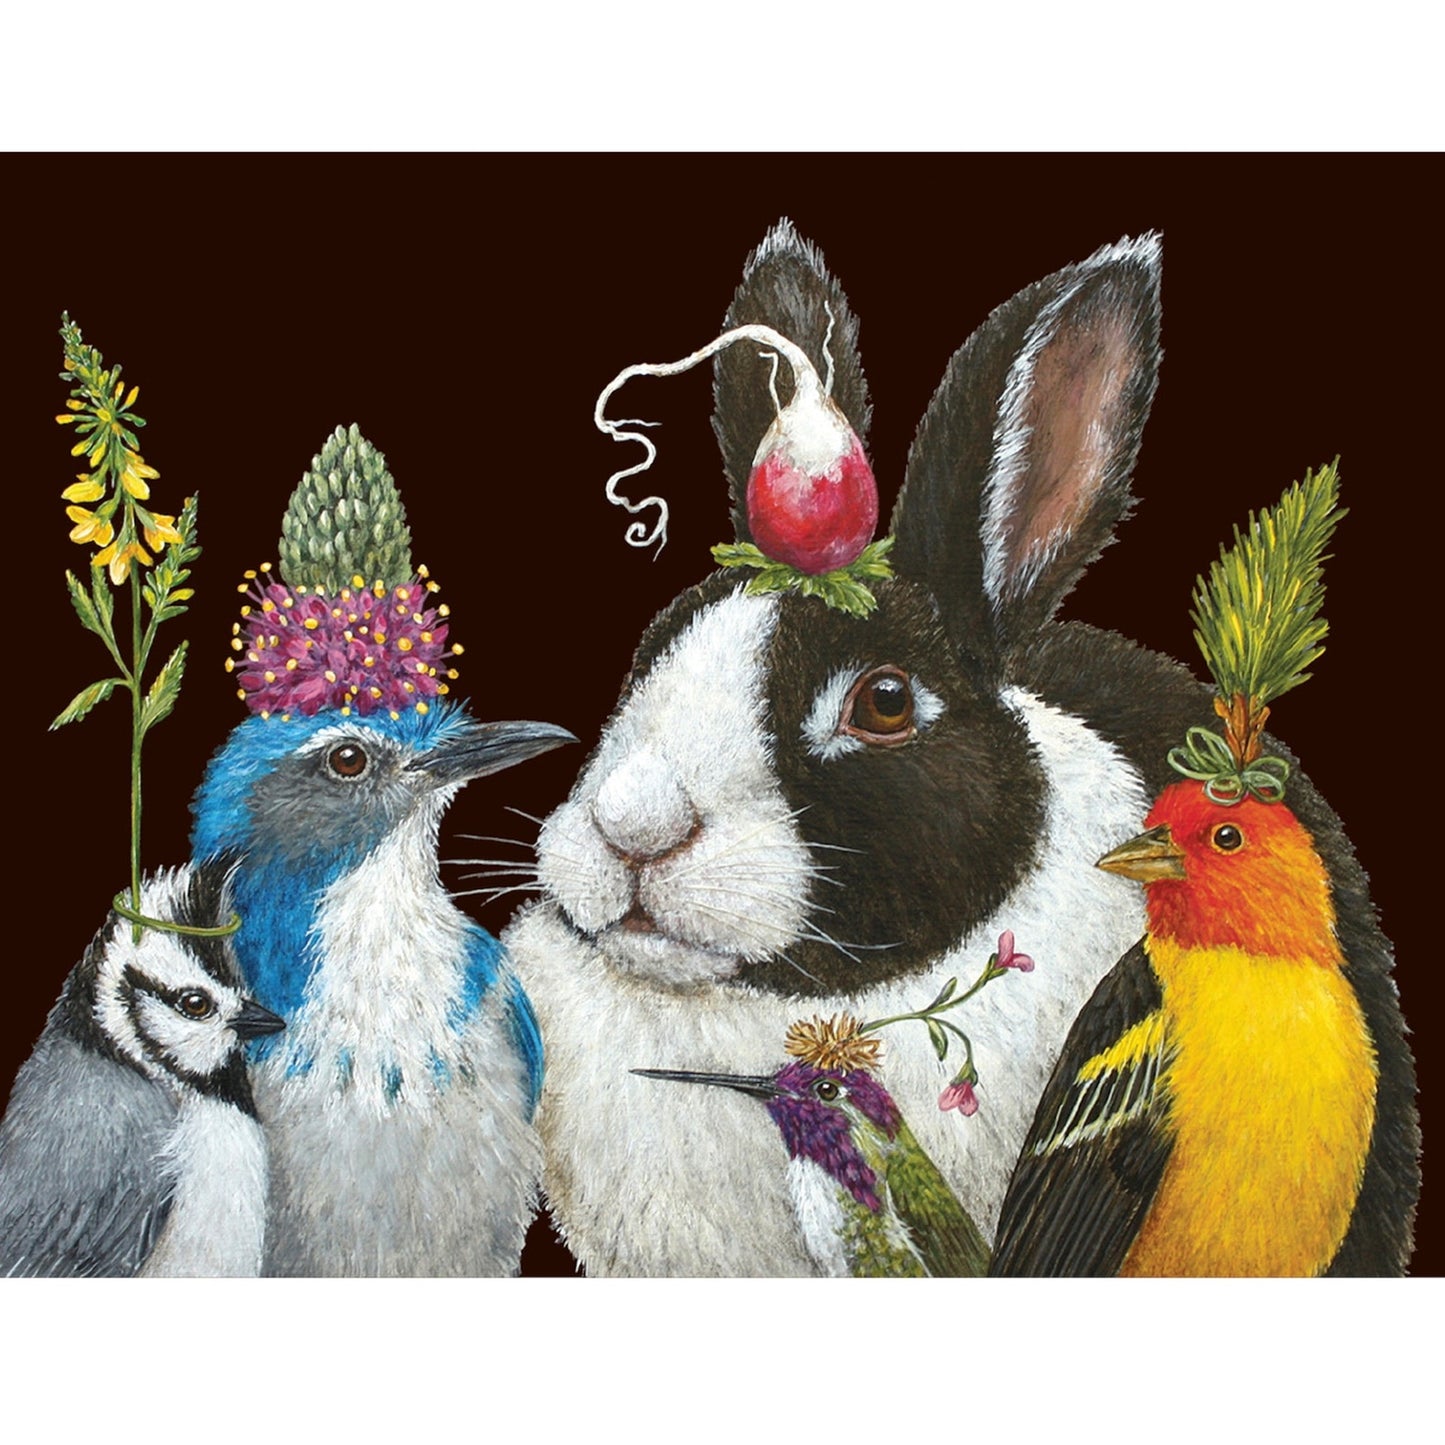 The rabbit is looking radishing with the radish on her head and the birds are there to celebrate with her.